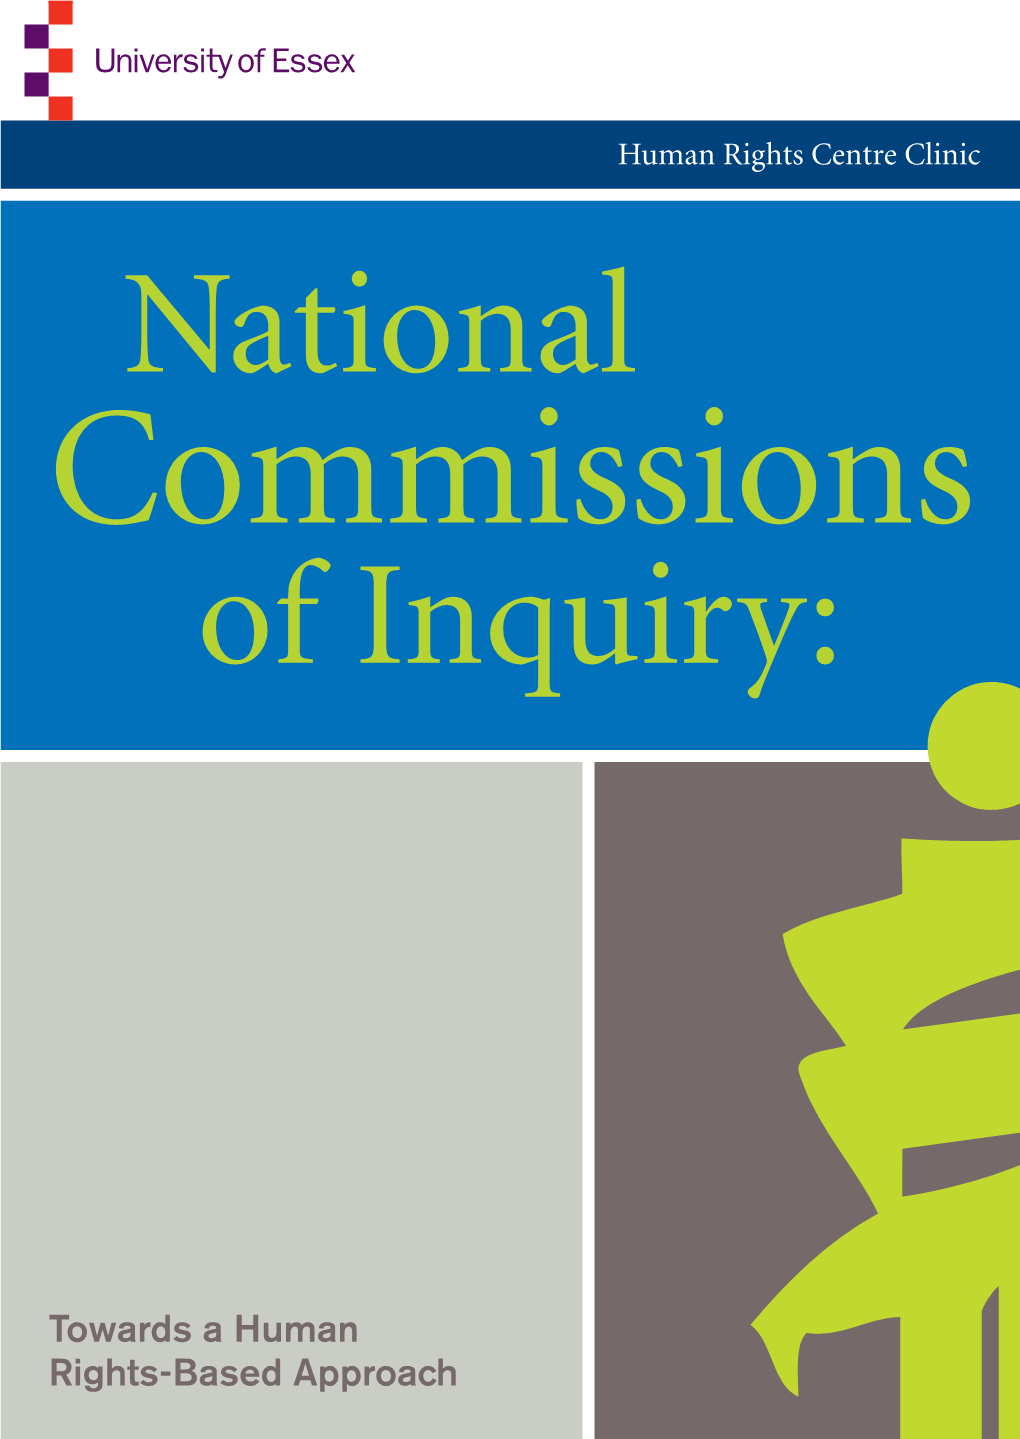 National Commissions of Inquiry: Towards a Human Rights Based Approach